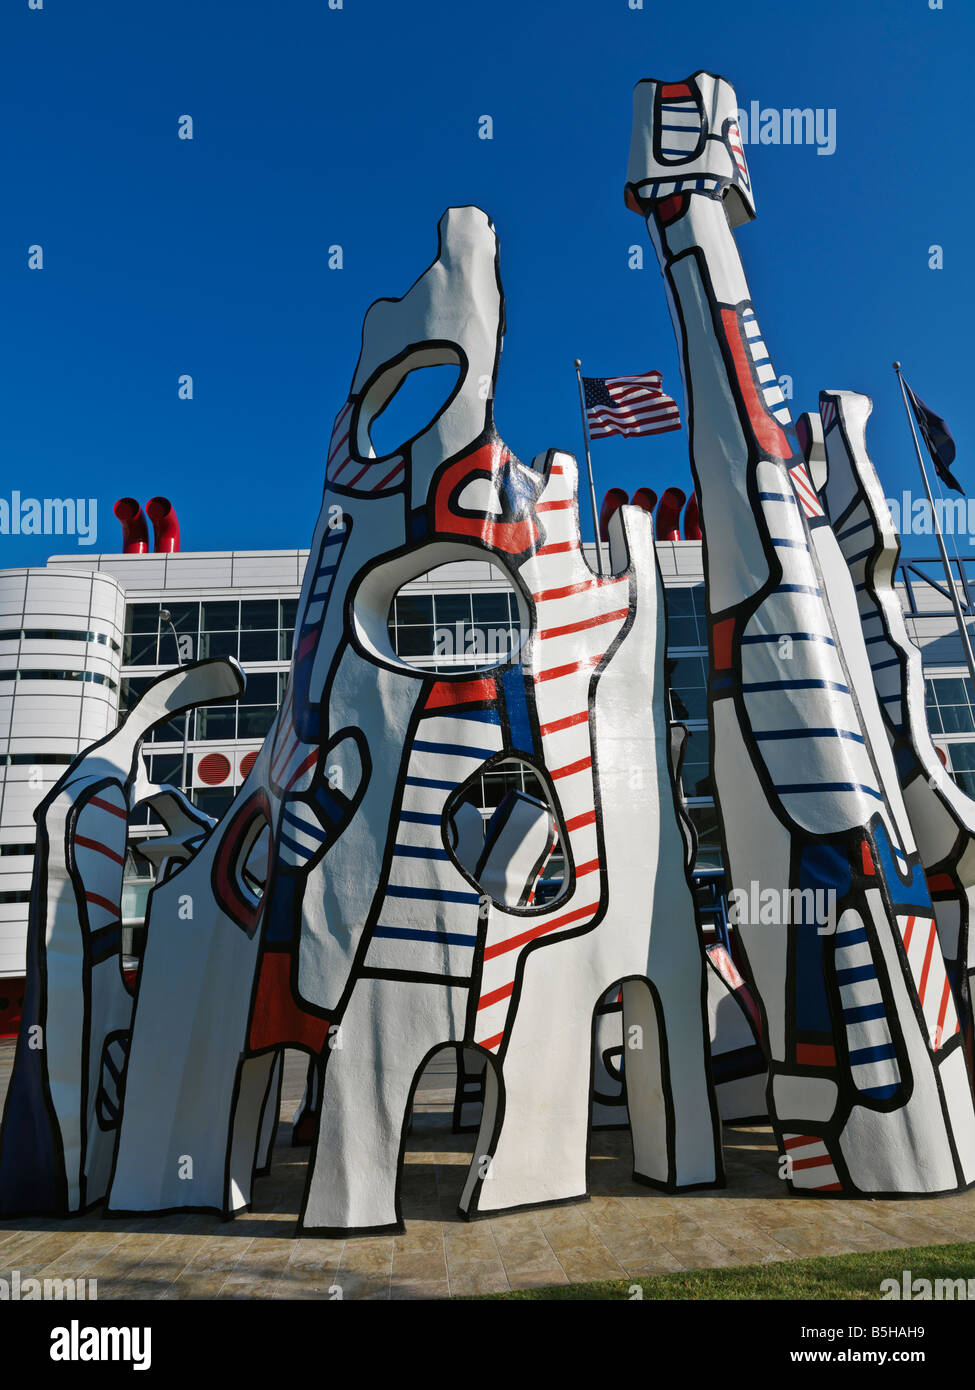 USA,Texas,Houston,sculpture of Monument au Fantome by Jean Dubuffet in Discovery Park Stock Photo